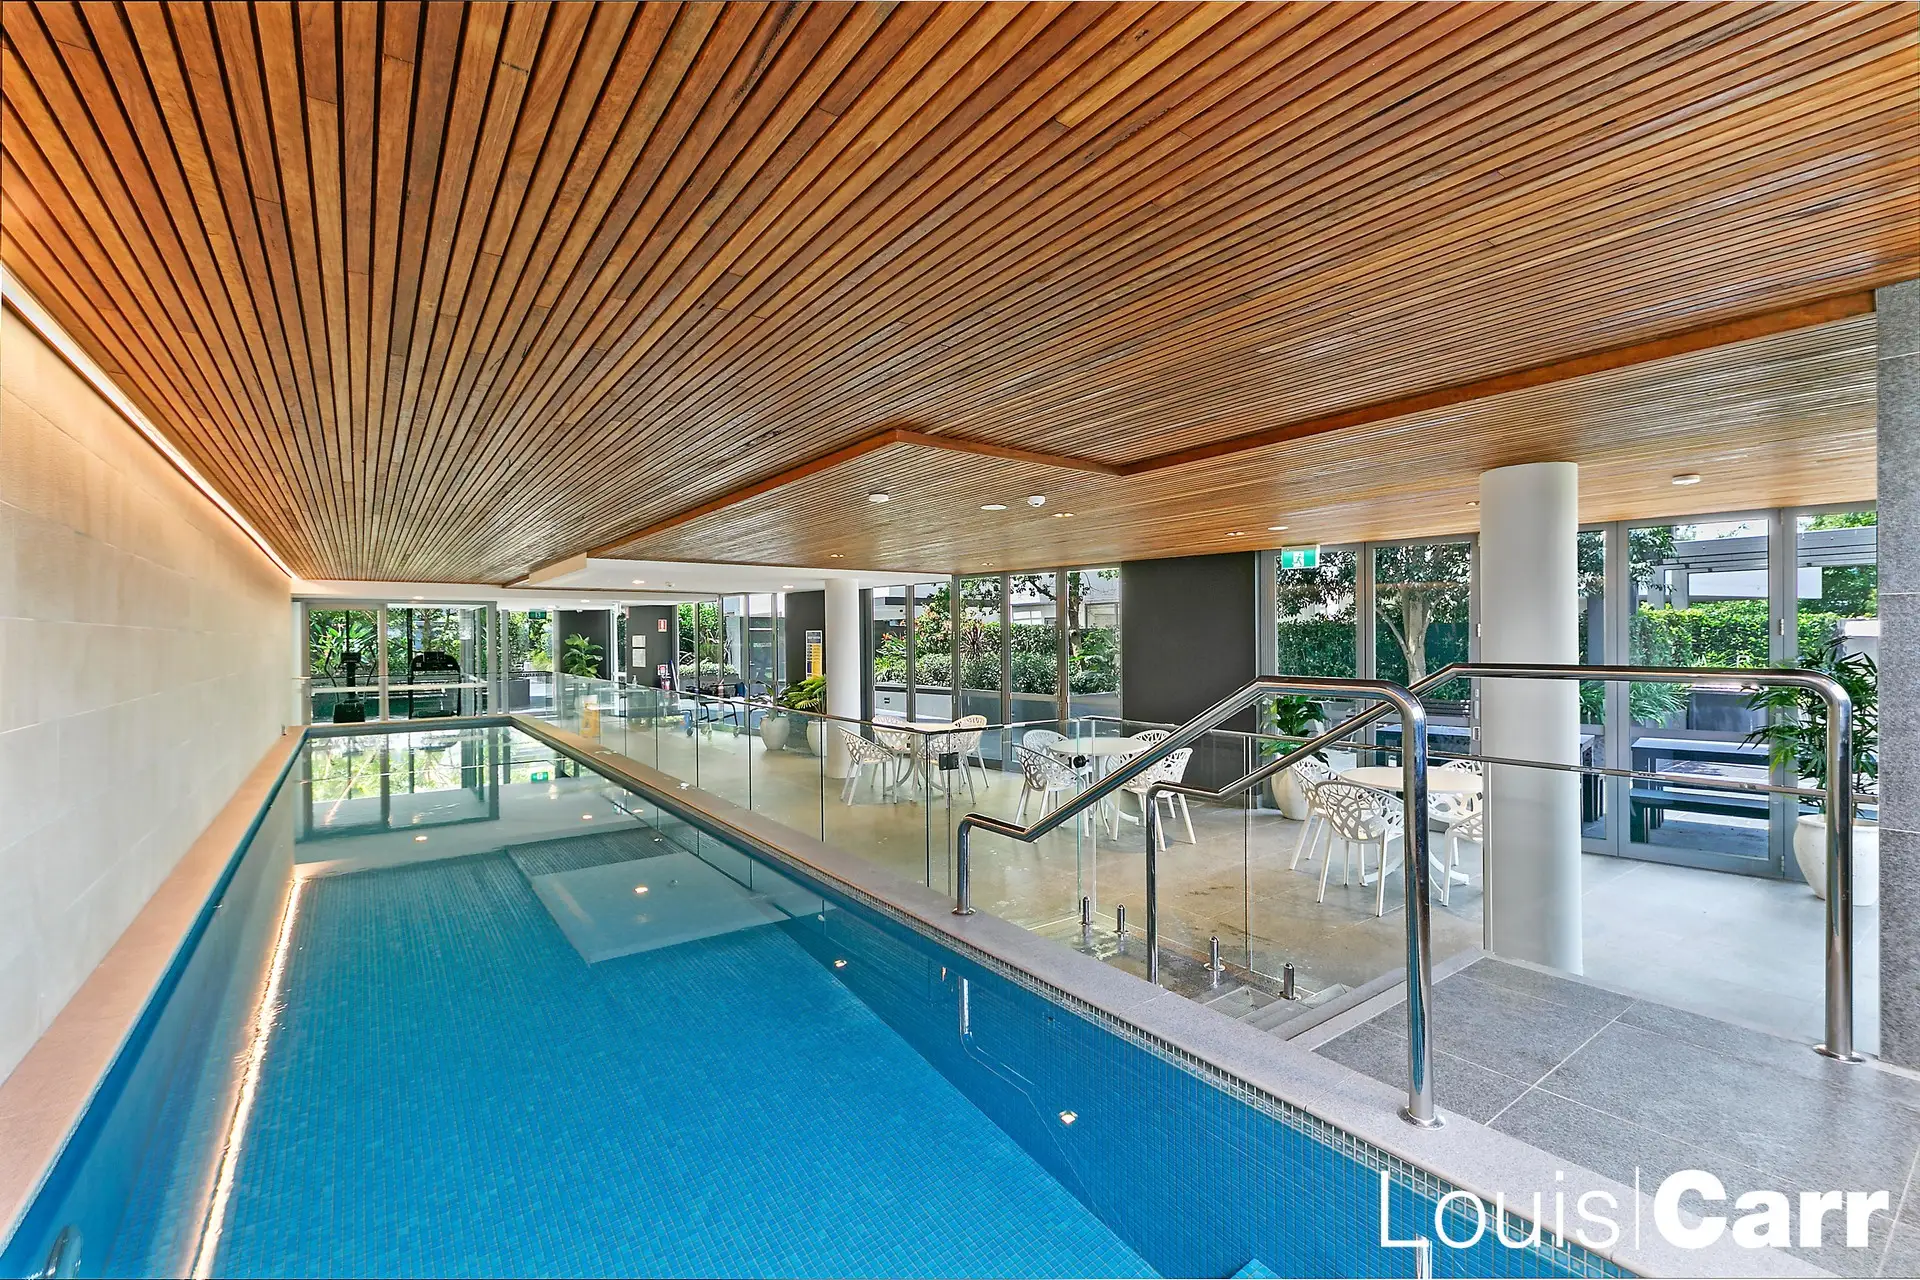 Photo #13: 74/38 Solent Circuit, Norwest - Sold by Louis Carr Real Estate